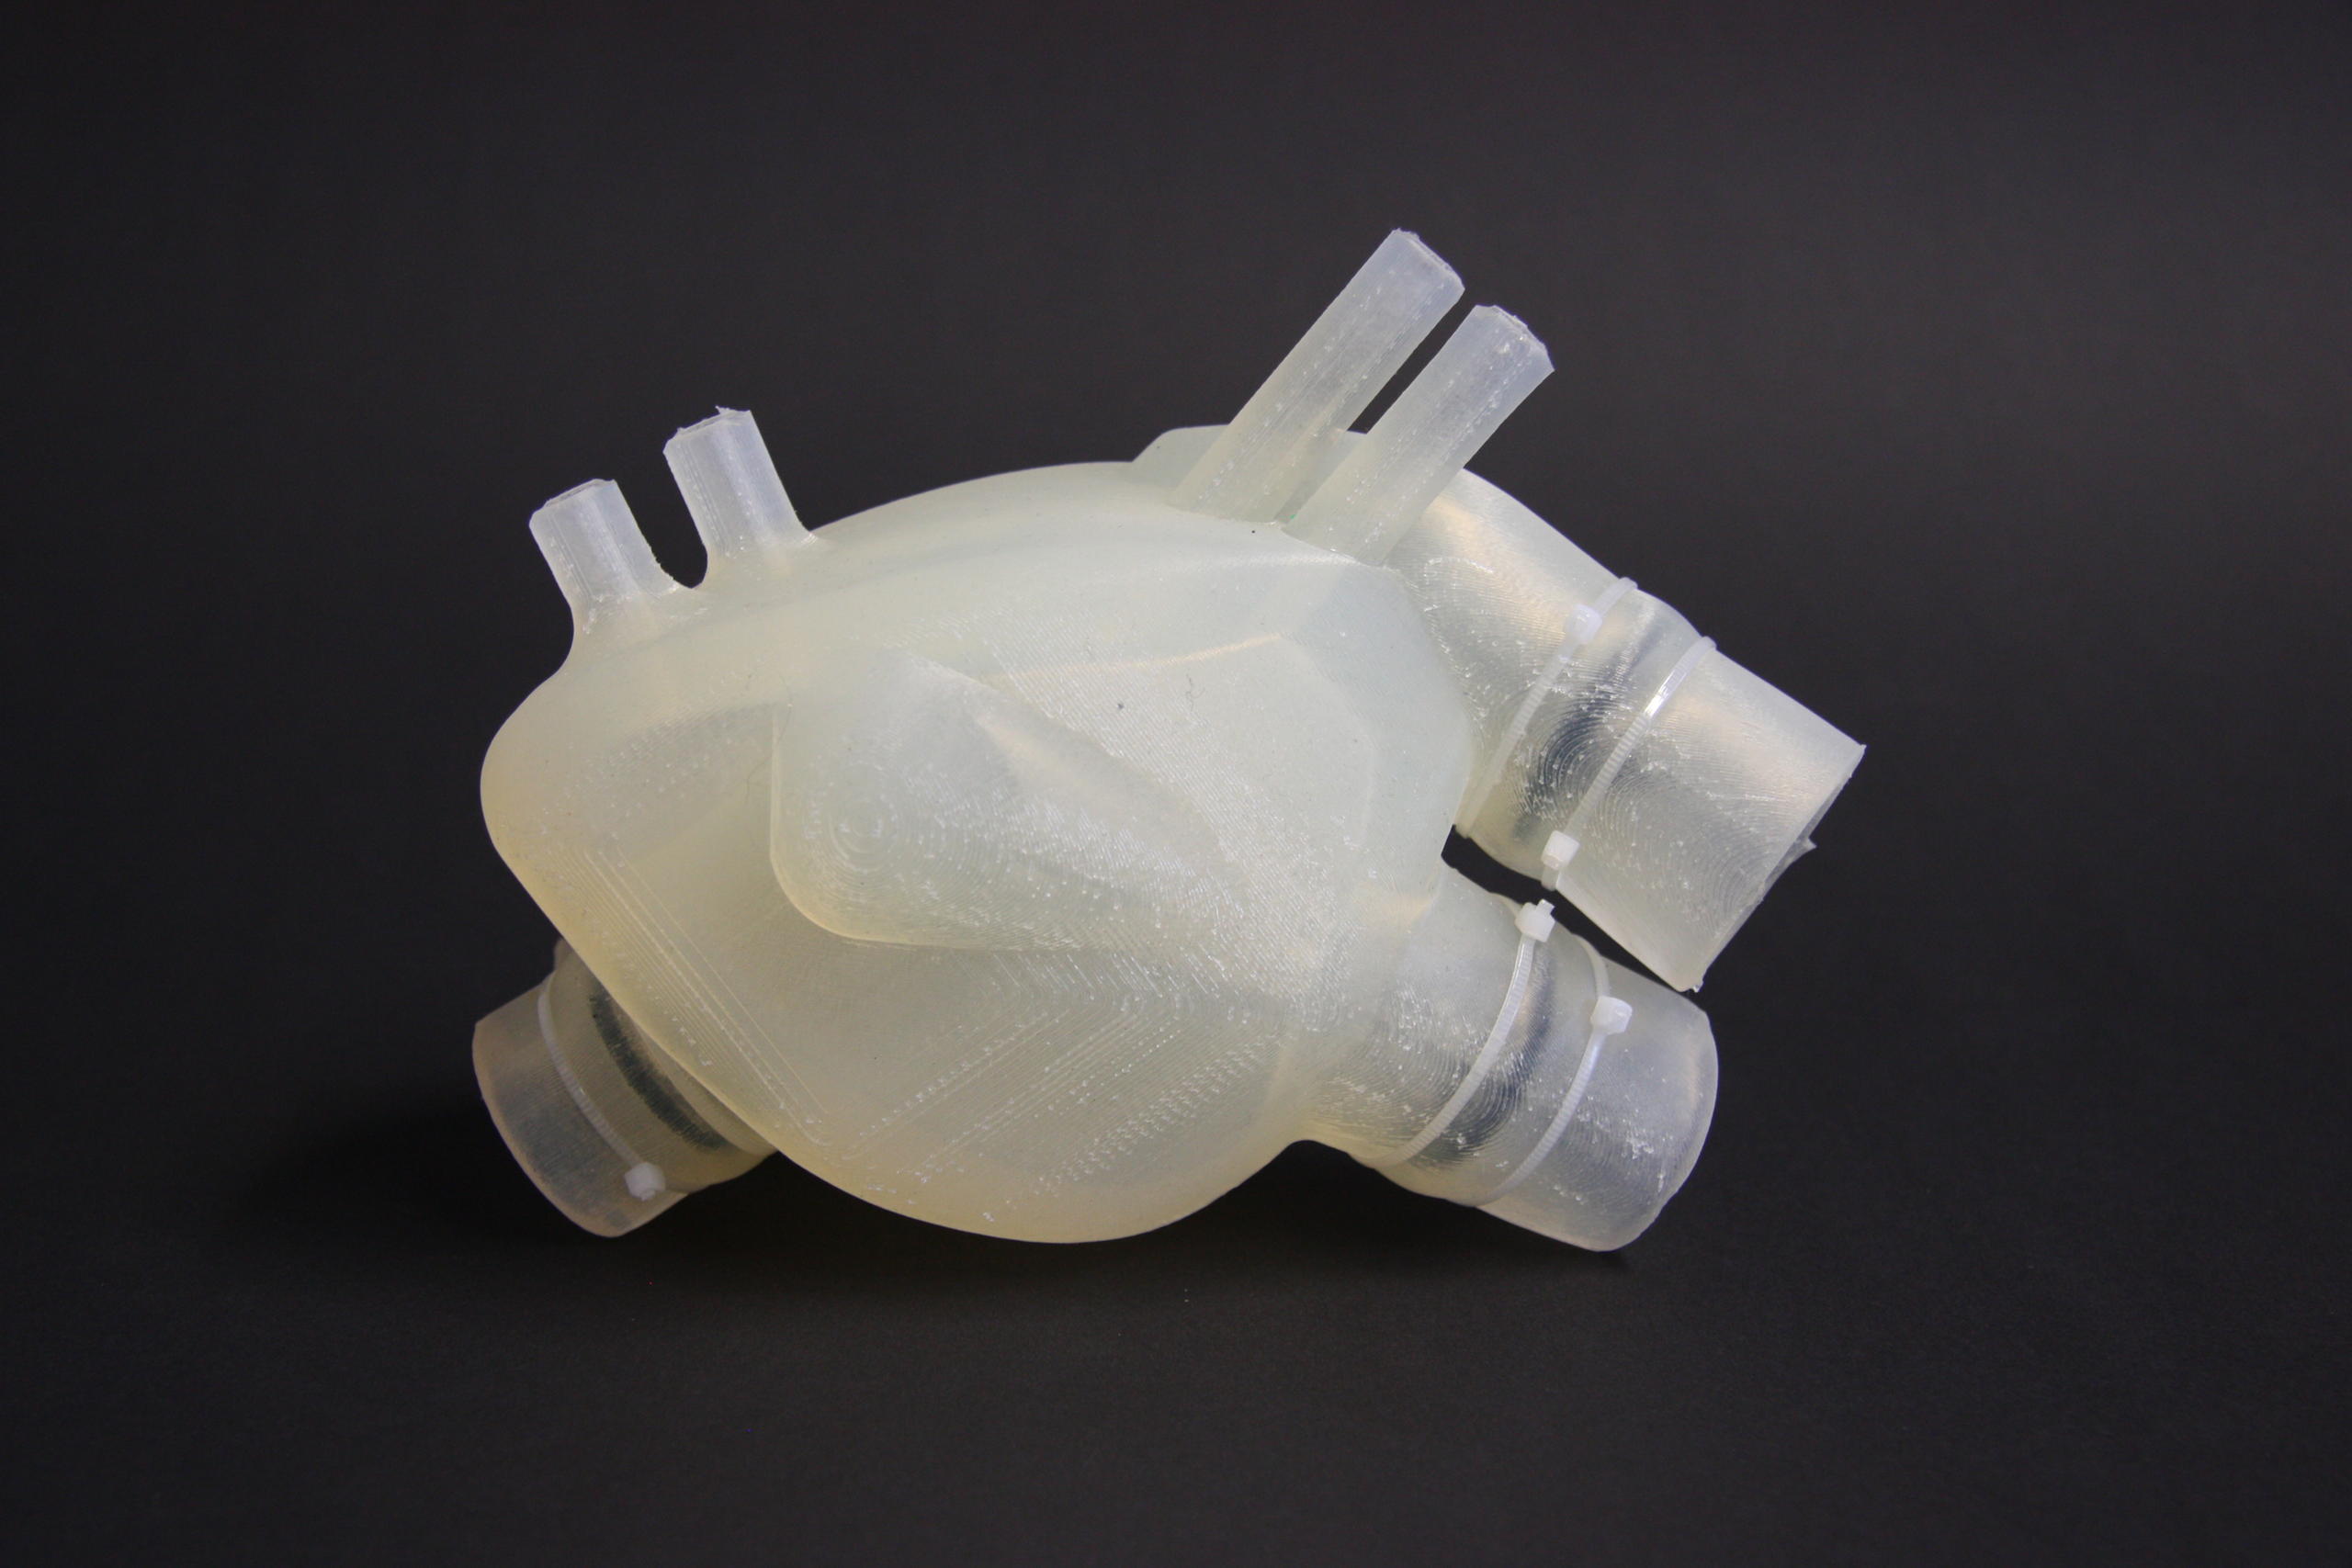 The artificial heart imitates a human heart as closely as possible